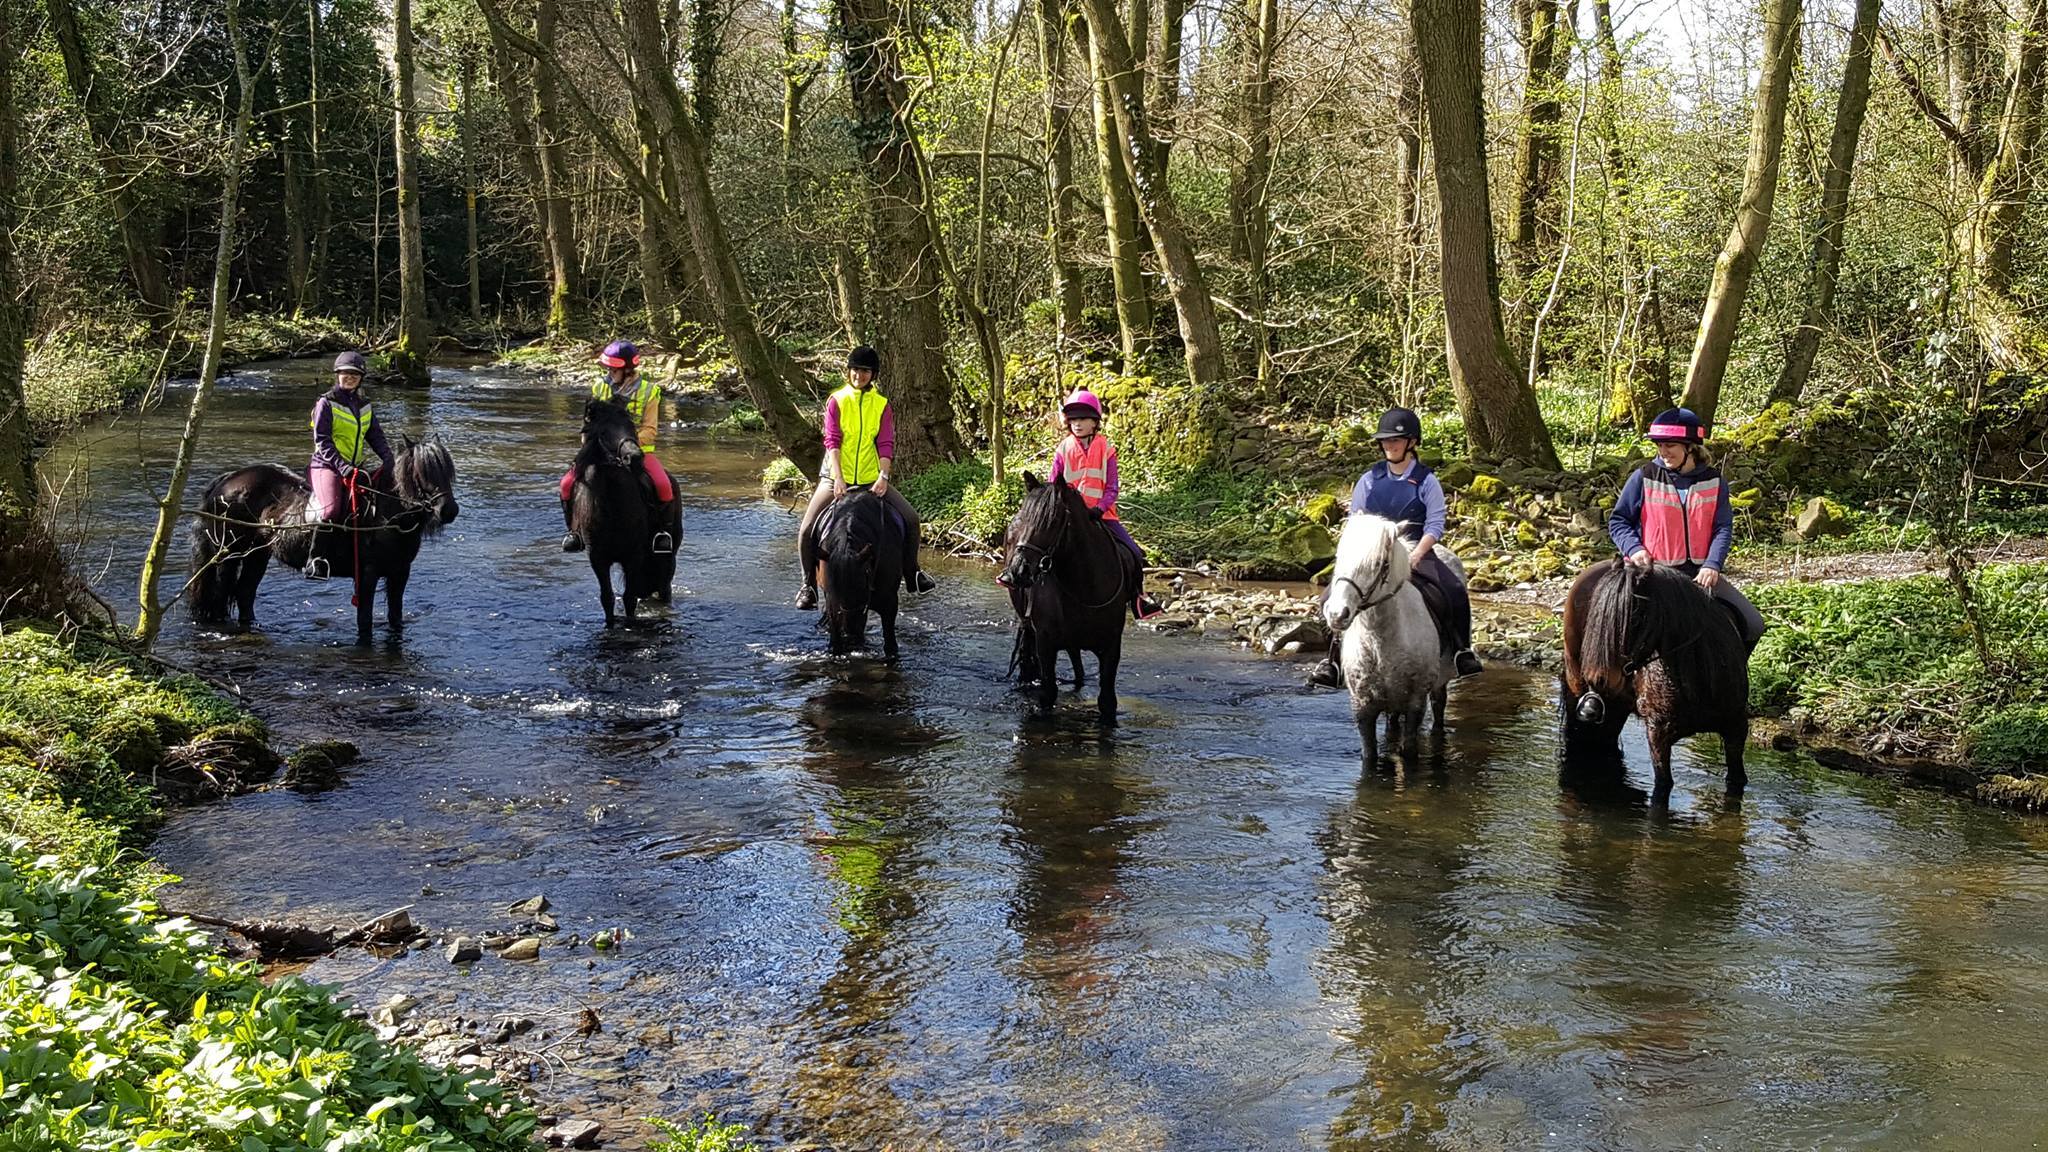 ponies and riders fording across a stream through woodland